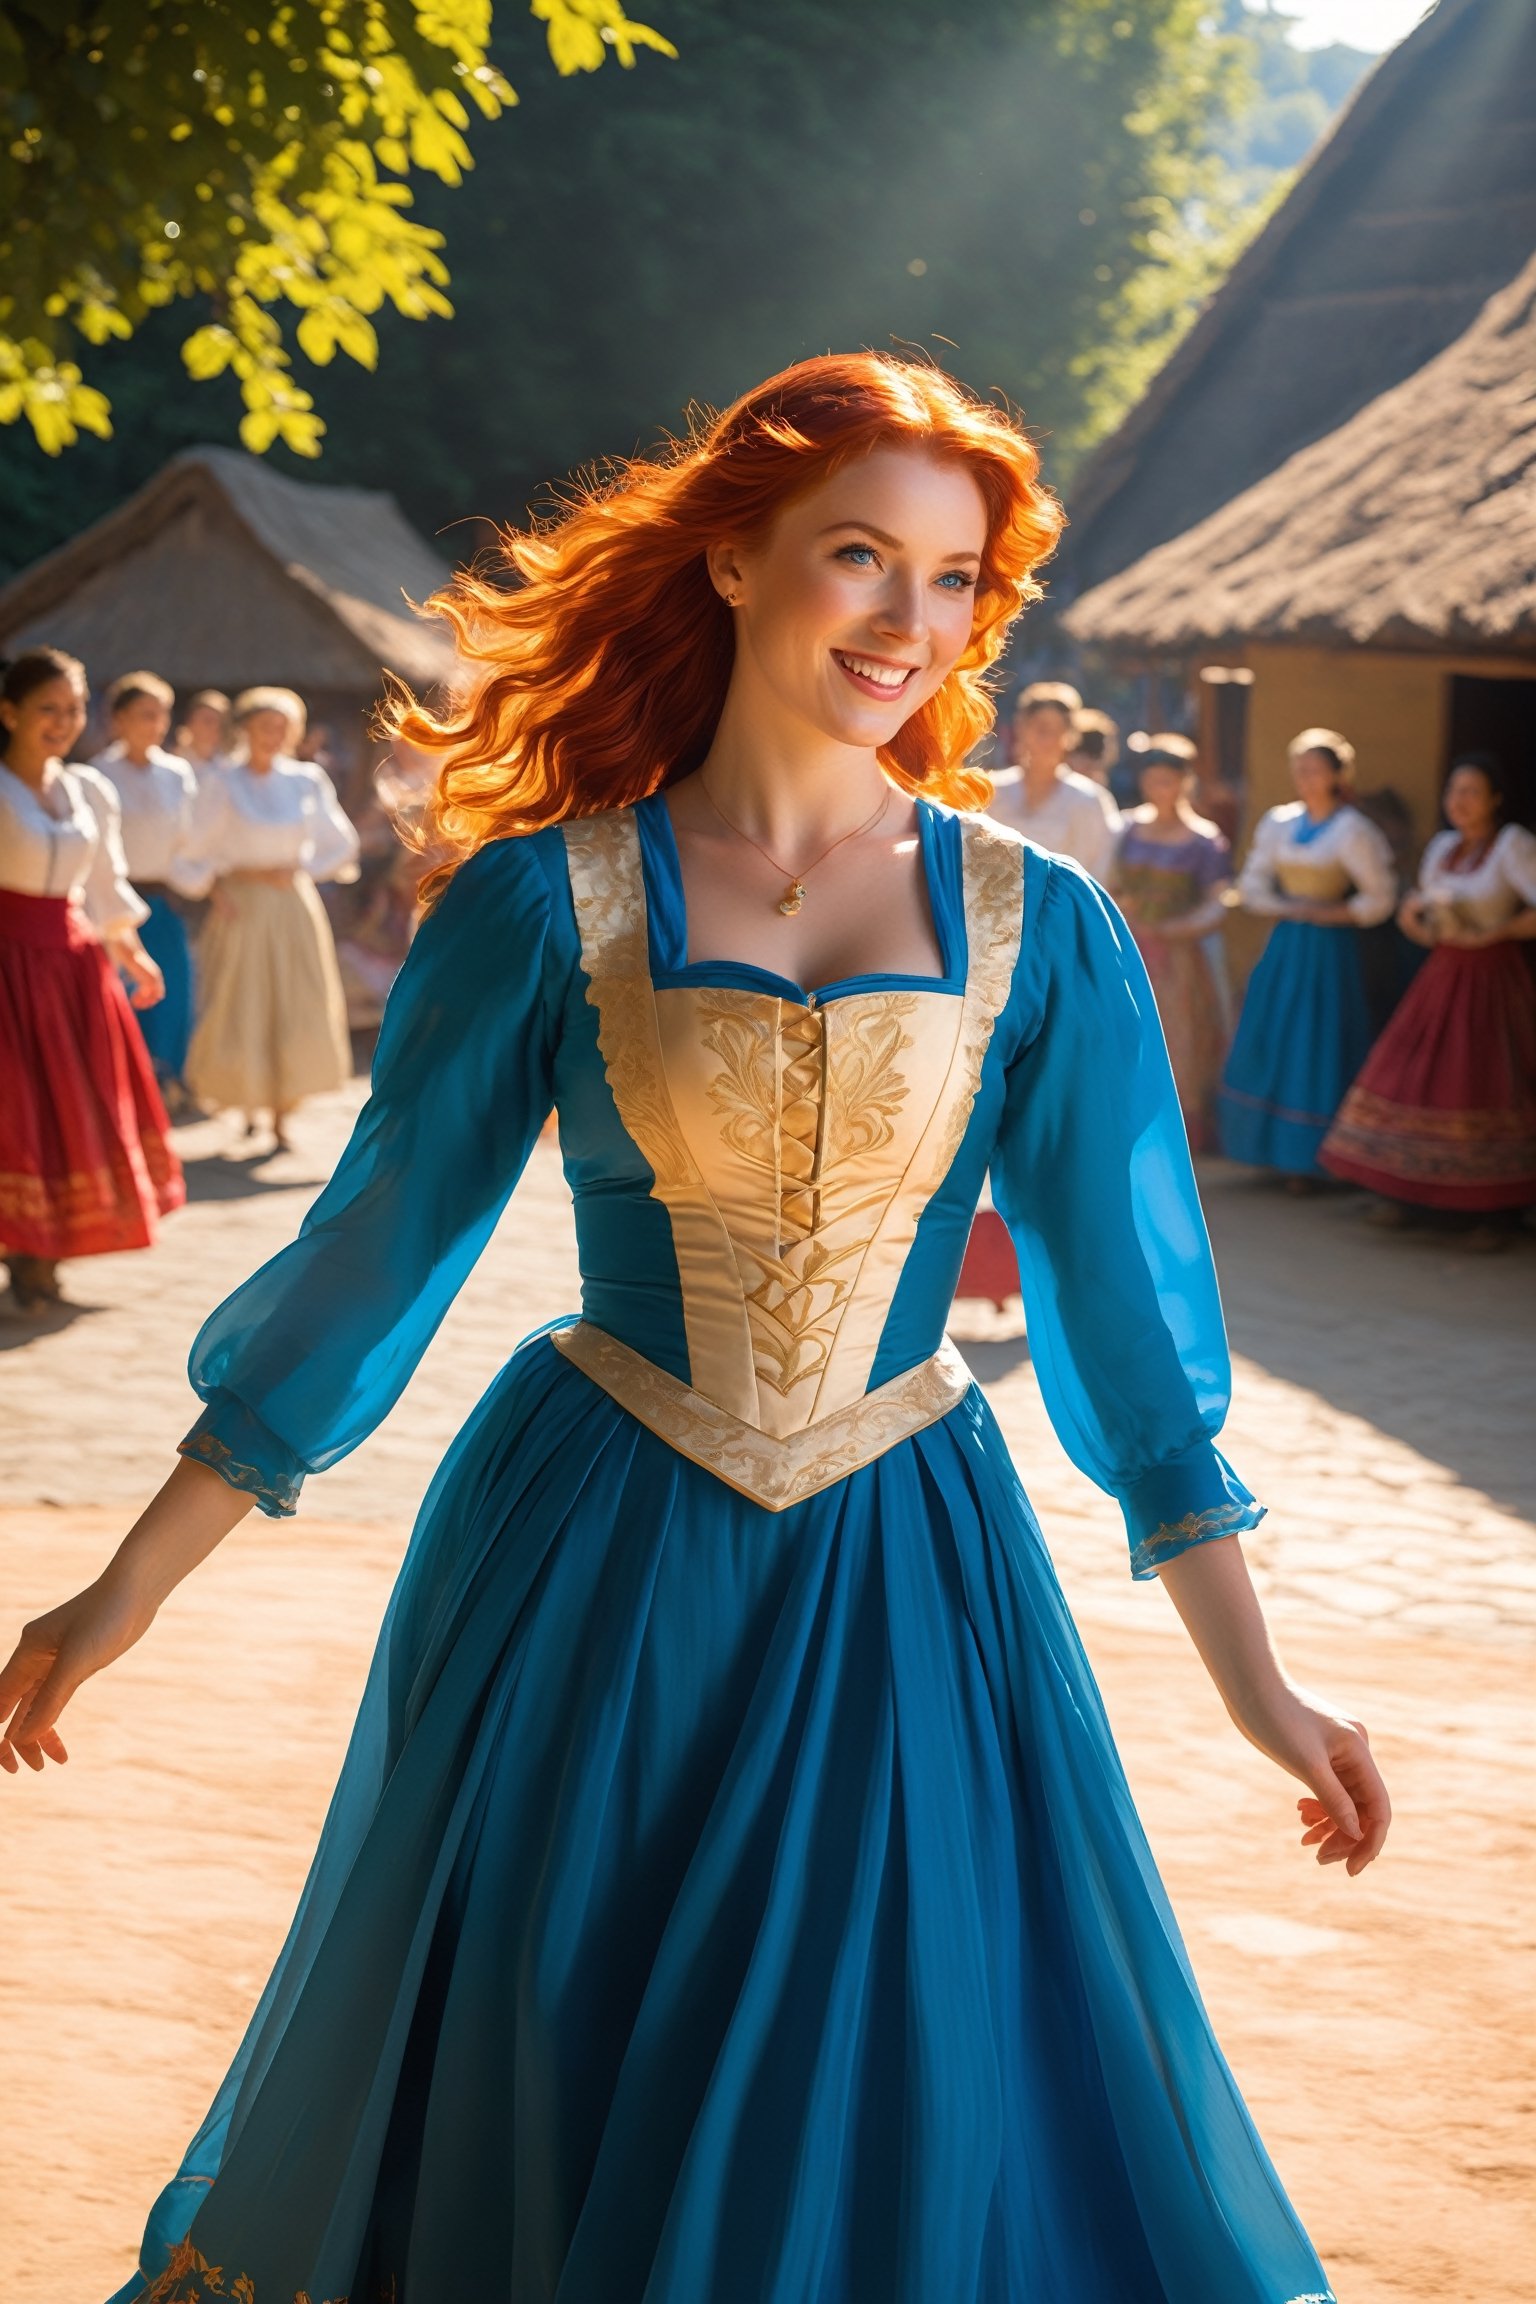 Pictures of a 25-year-old red-haired angel, with a warm,((angel wongs)), happy expression and big blue eyes gazing straight at the viewer, She has a warm, happy expression on her face and large blue eyes that look straight at the viewer. She is dancing in a traditional folkloric dress at a village festival on a sunny day, The viewer has the impression of being her dancing partner, Sunlight rays penetrate the scene created by ray-tracing, giving the sunlight a realistic effect. The background is slightly blurred to focus on her facial expressions and the details of her dress. The lighting is natural and bright, enhancing the cheerful atmosphere,18thcentury,photo_b00ster,bj_Devil_angel,An angel 